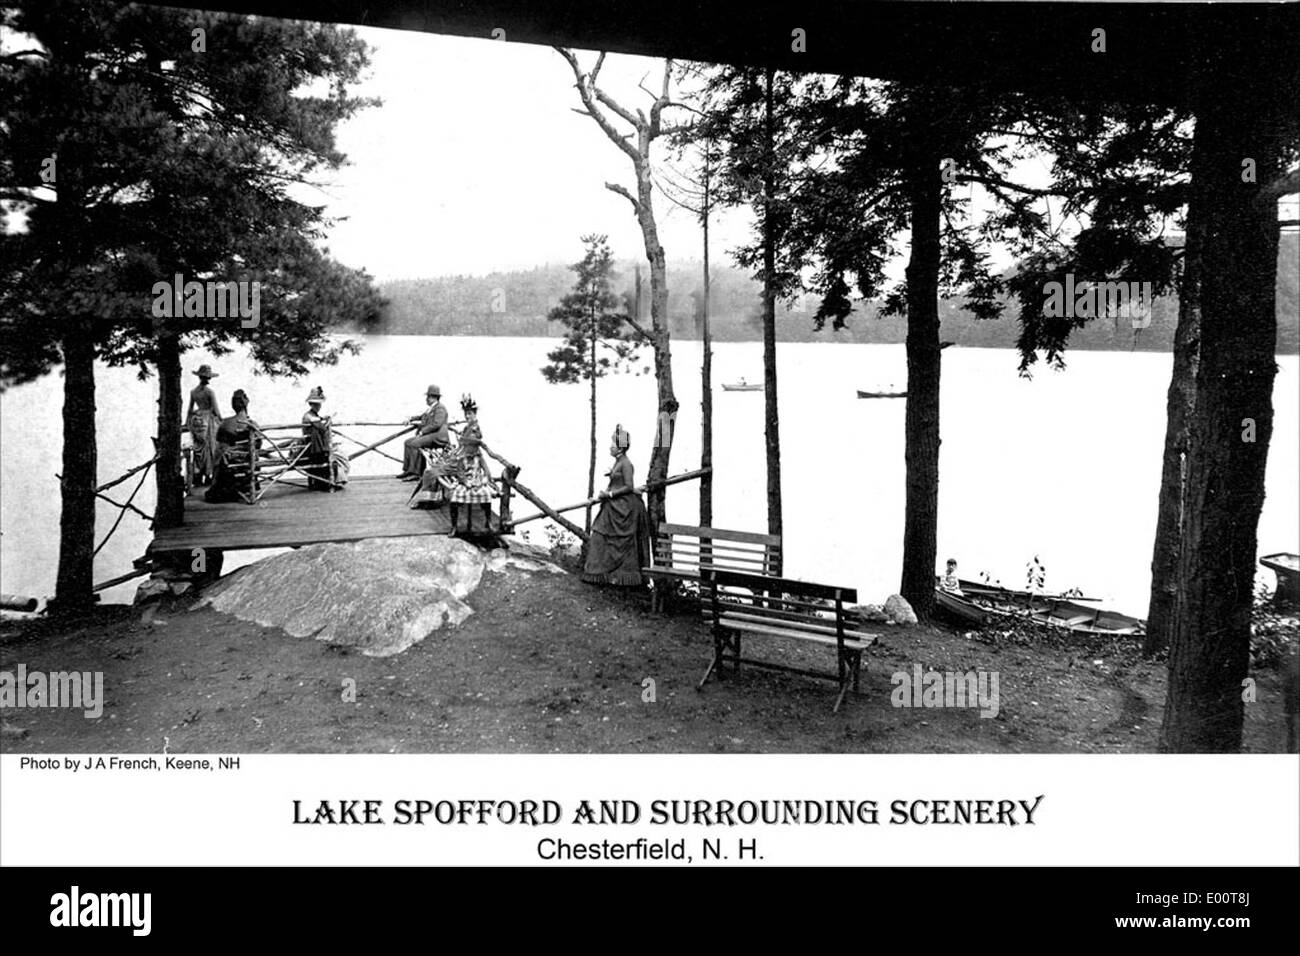 Spofford Lake in Chesterfield, New Hampshire Stock Photo